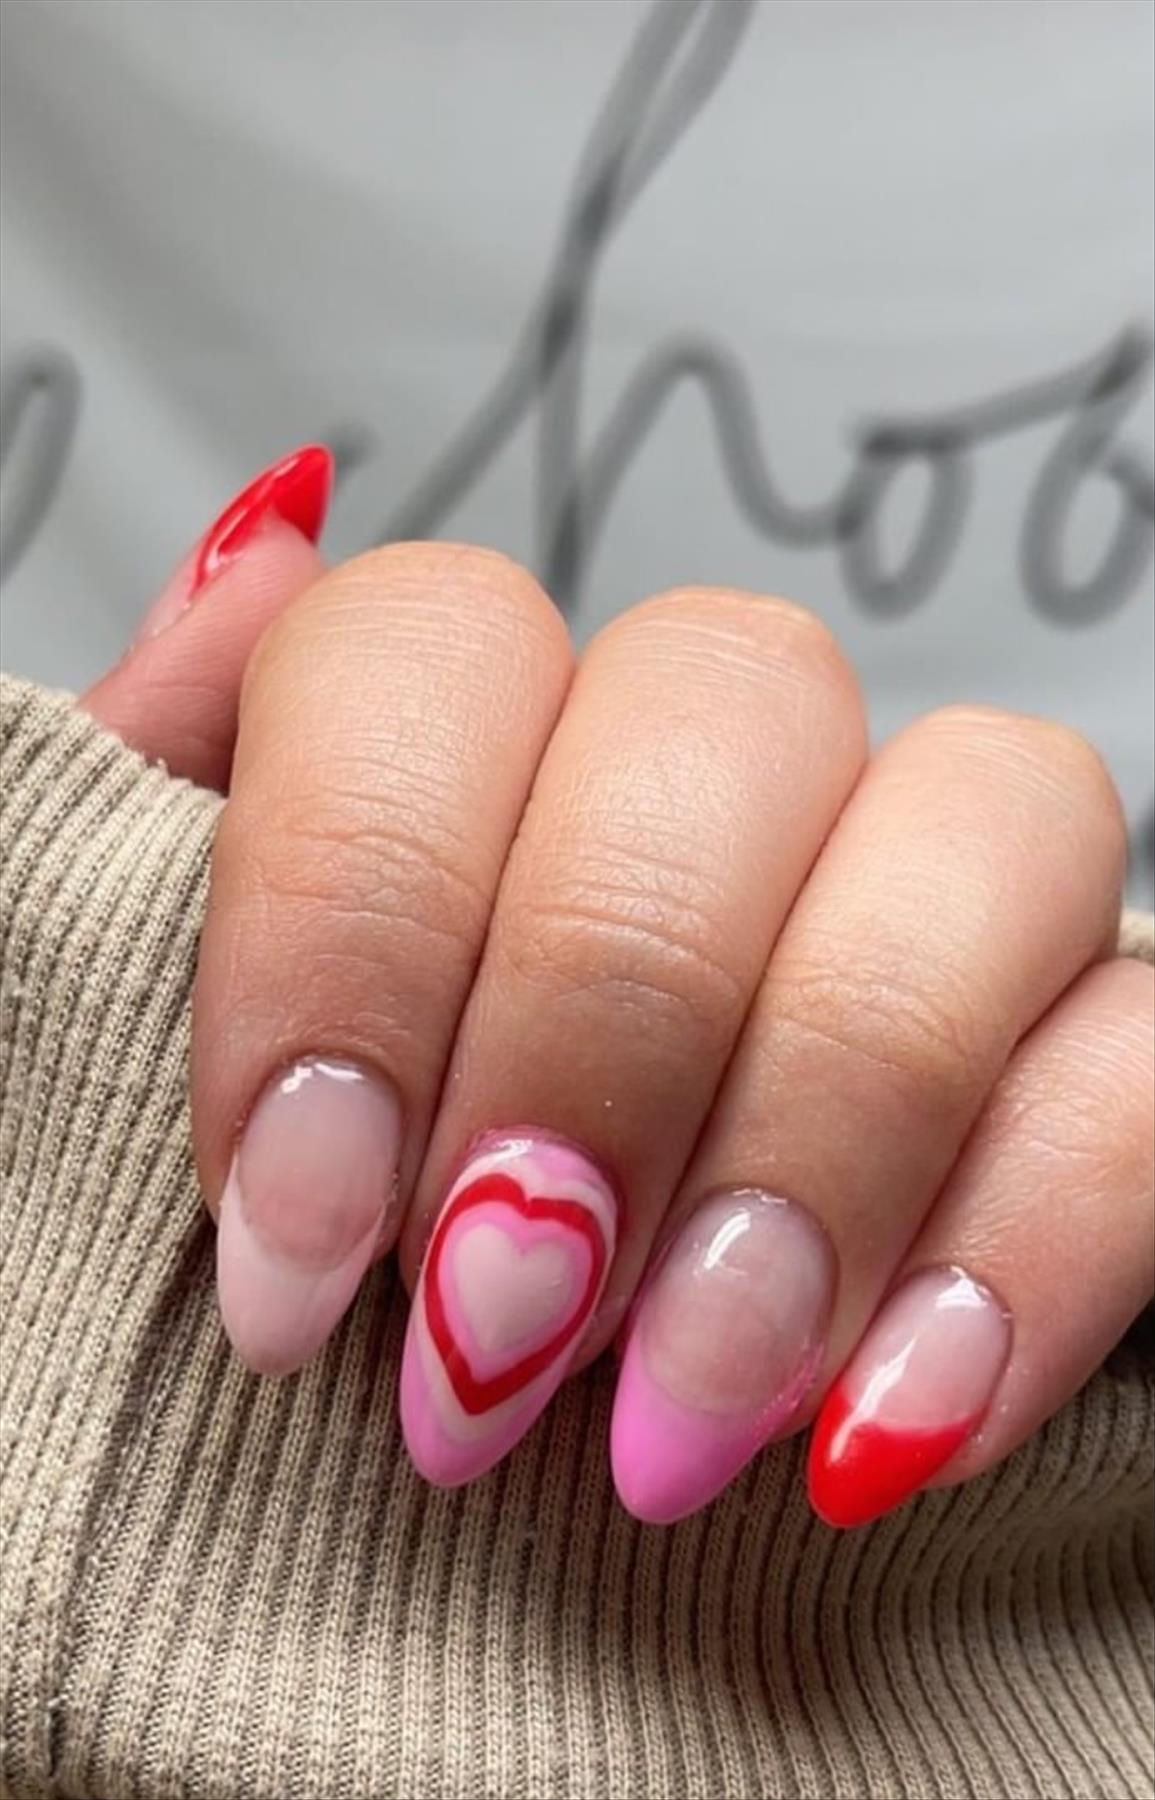 Best Valentine's day nails design Perfect for your date